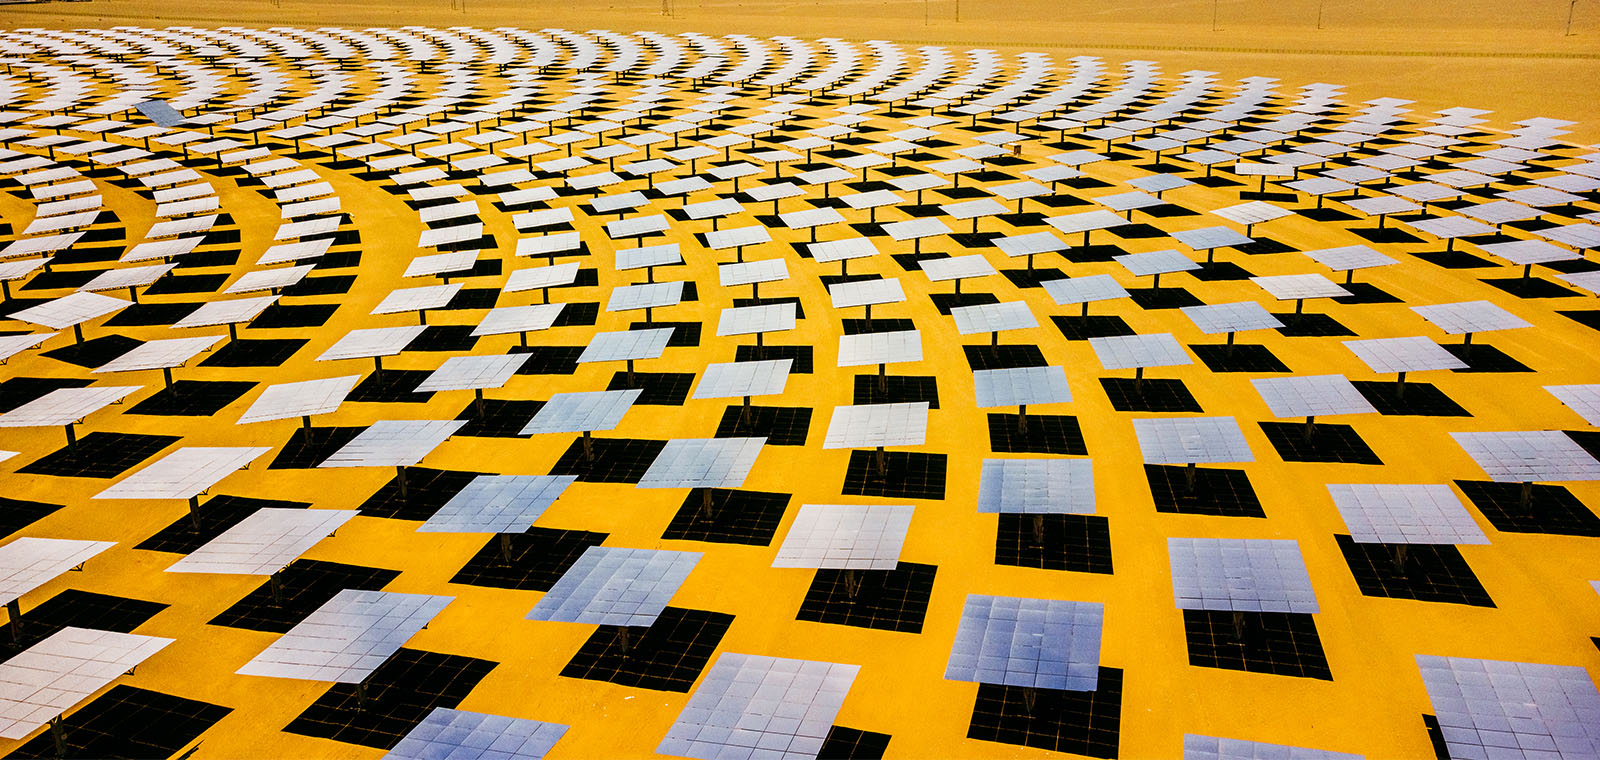 A sea of solar power panels stretch out in a curved shape against a yellow desert landscape.